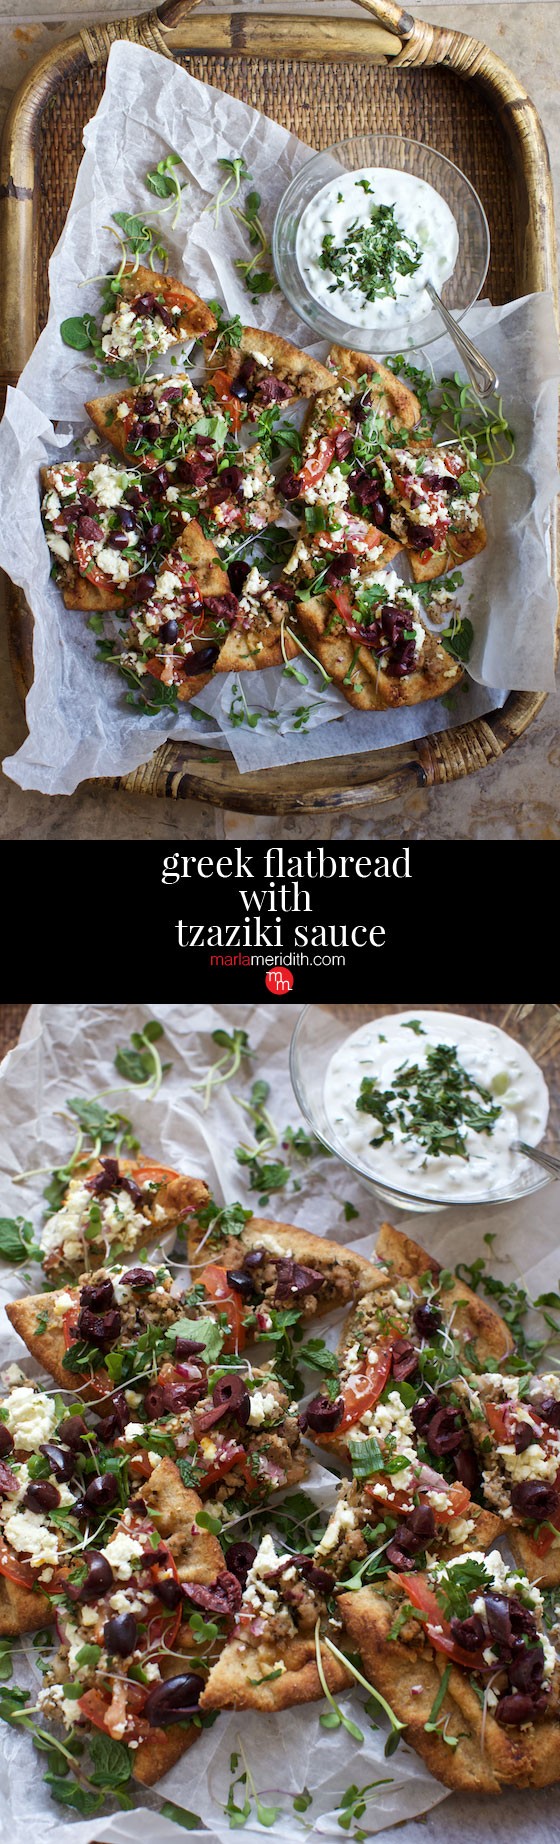 Greek Flatbread with Tzaziki Sauce recipe. A crowd pleaser for game day, family meals and entertaining. MarlaMeridith.com ( @marlameridith )